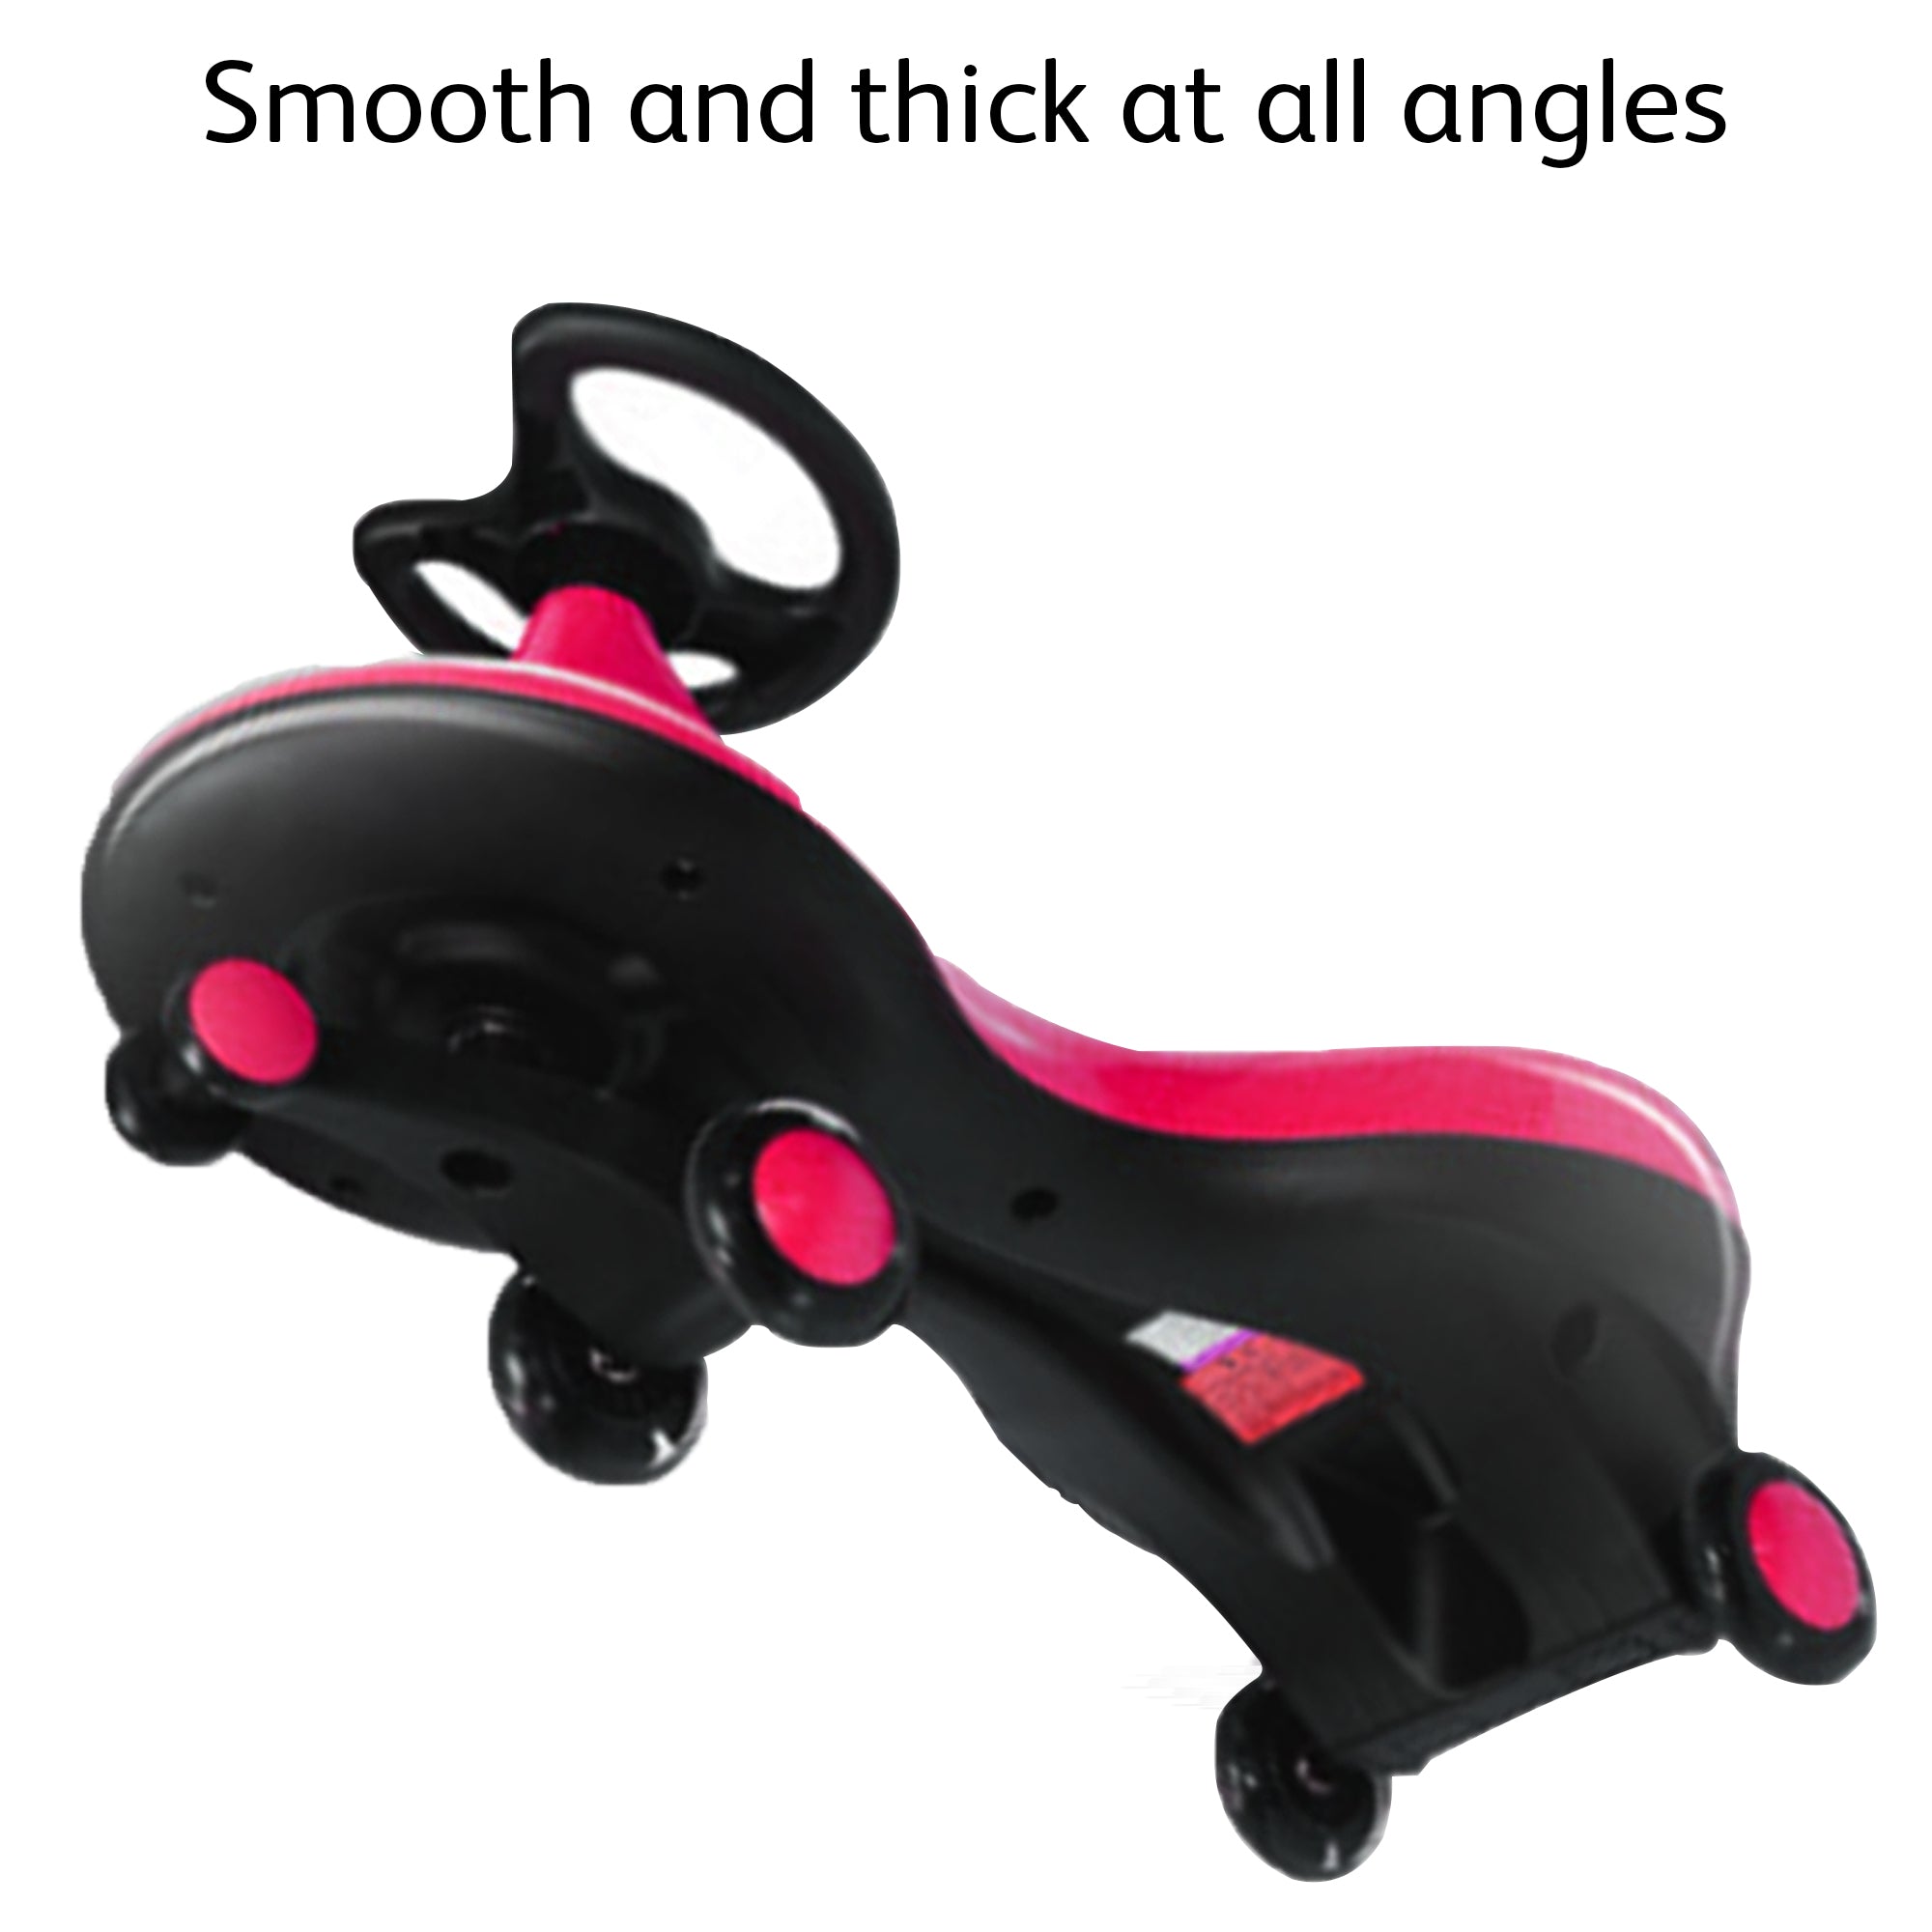 Tygatec Ride On Swing Car for Kids ( Pink Color )